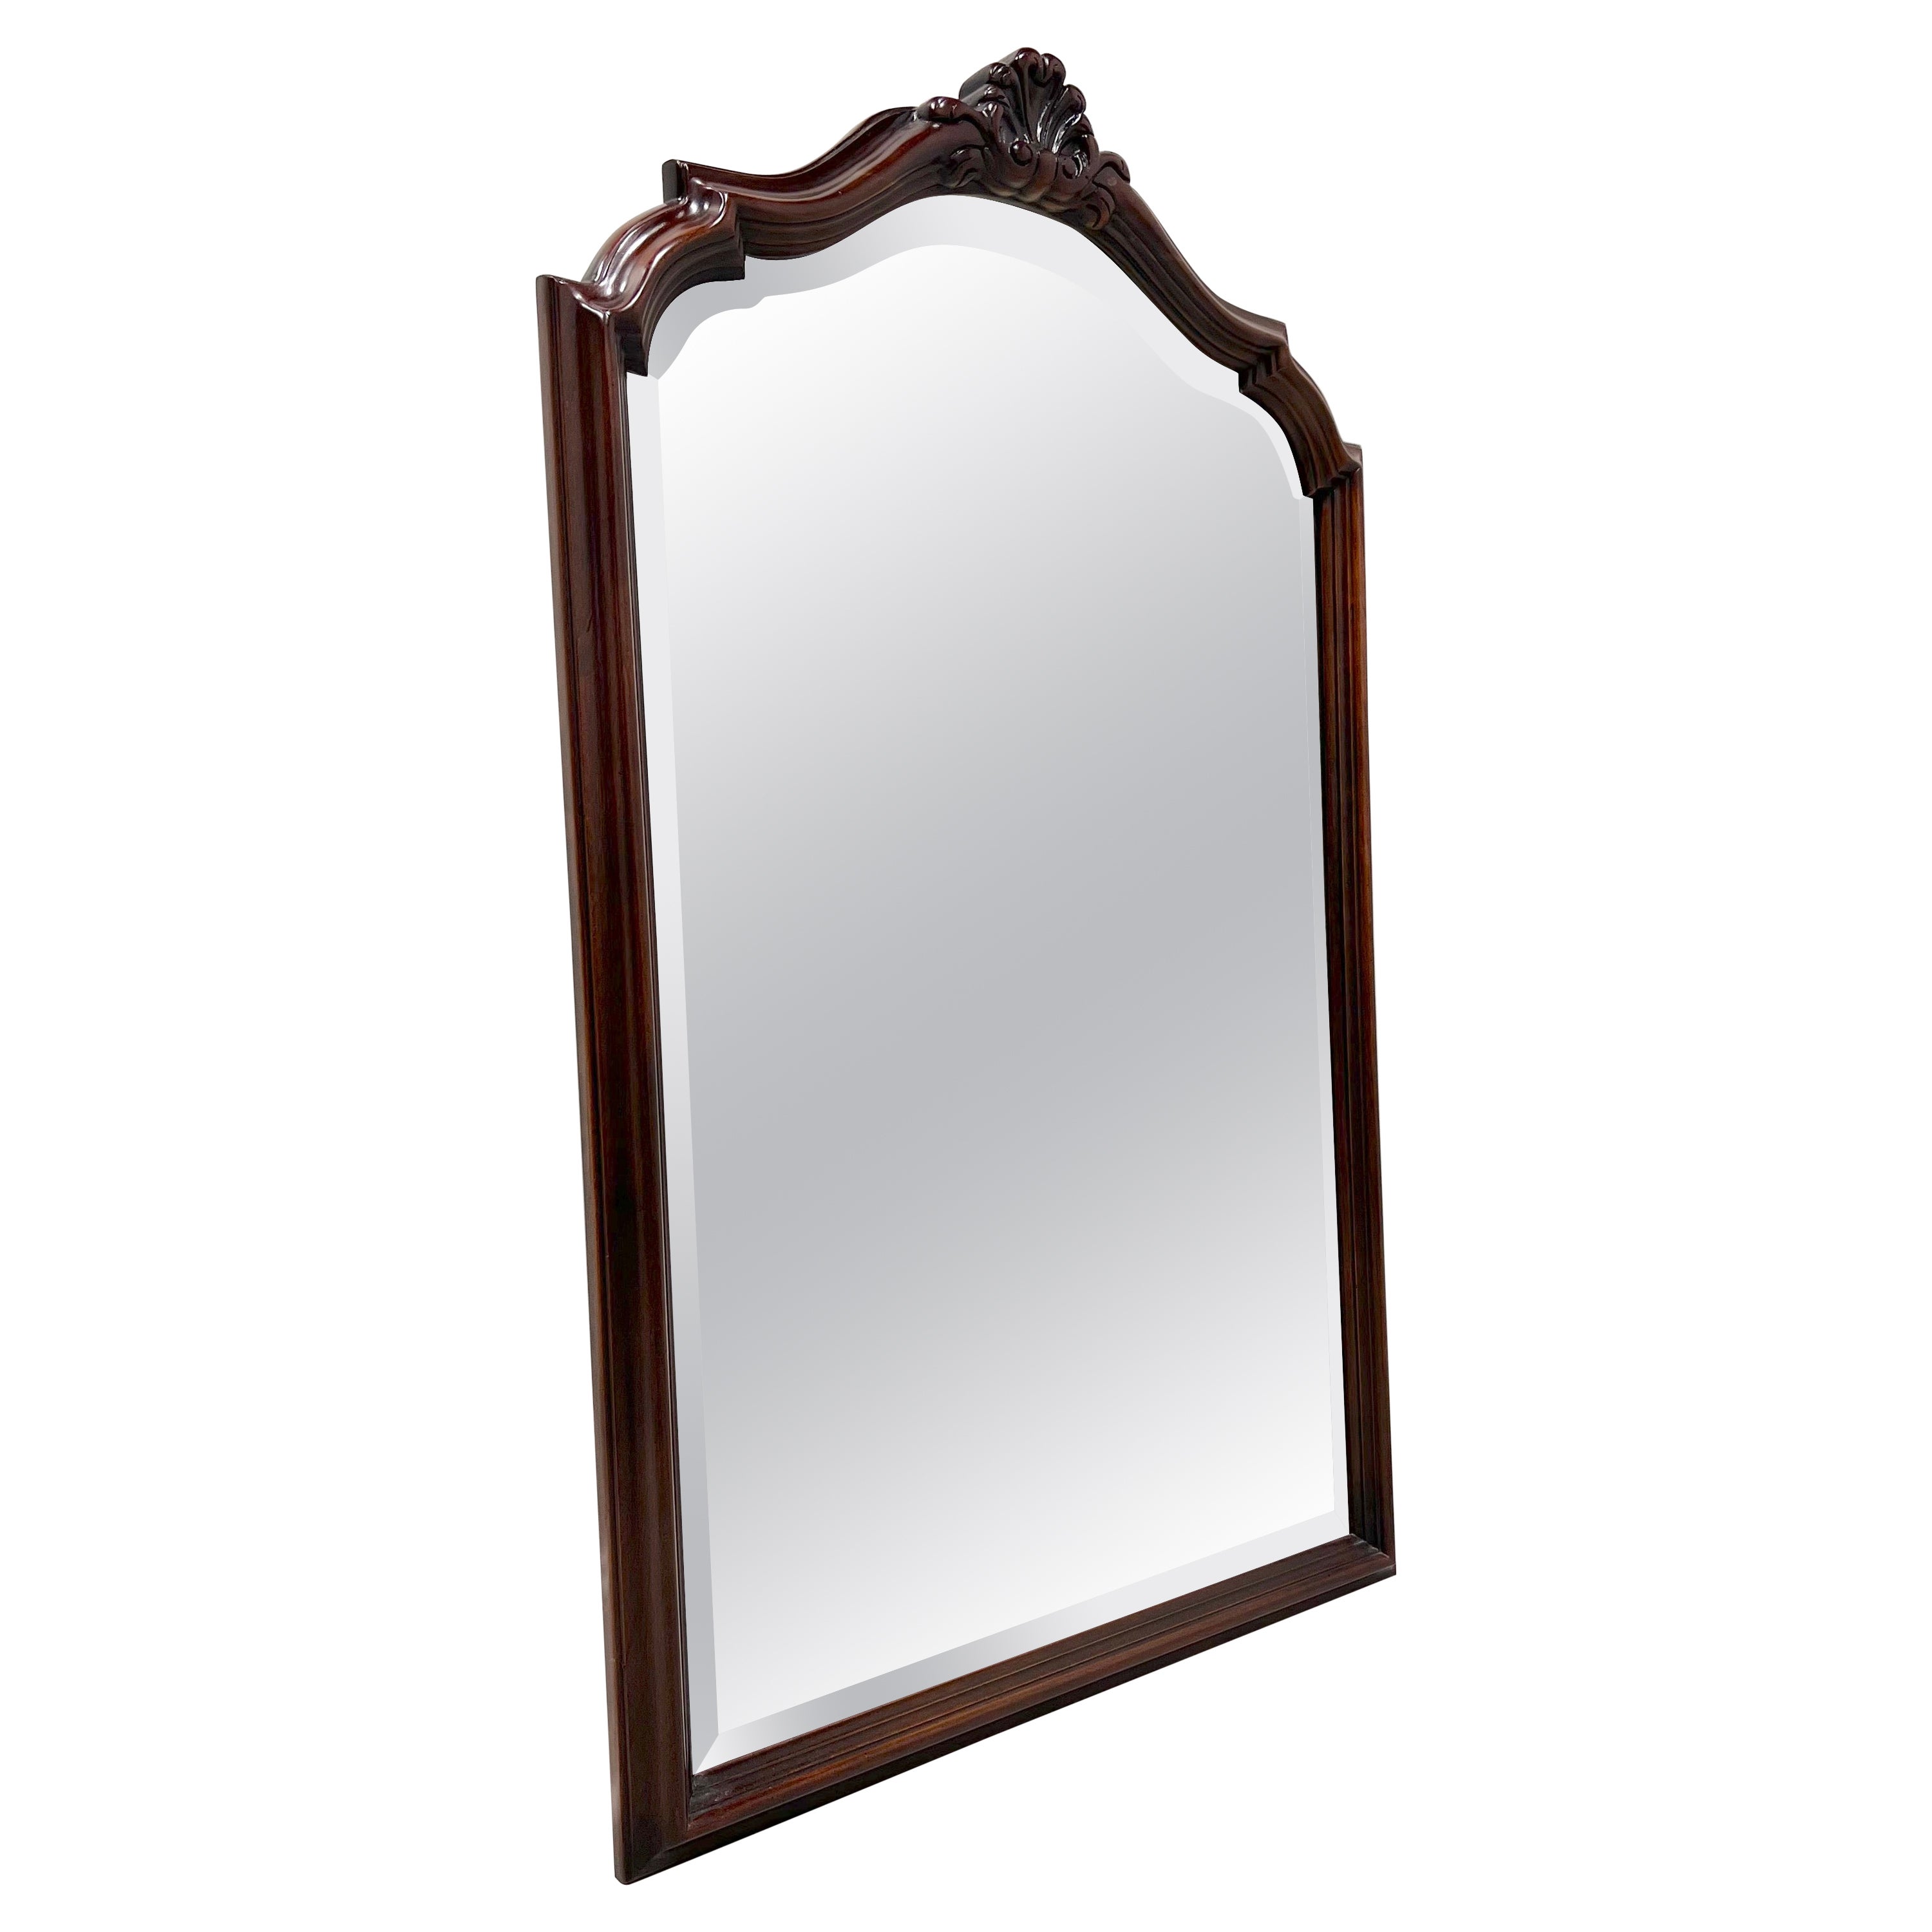 CENTURY Cardella Collection Cherry Italian Provincial Beveled Wall Mirror